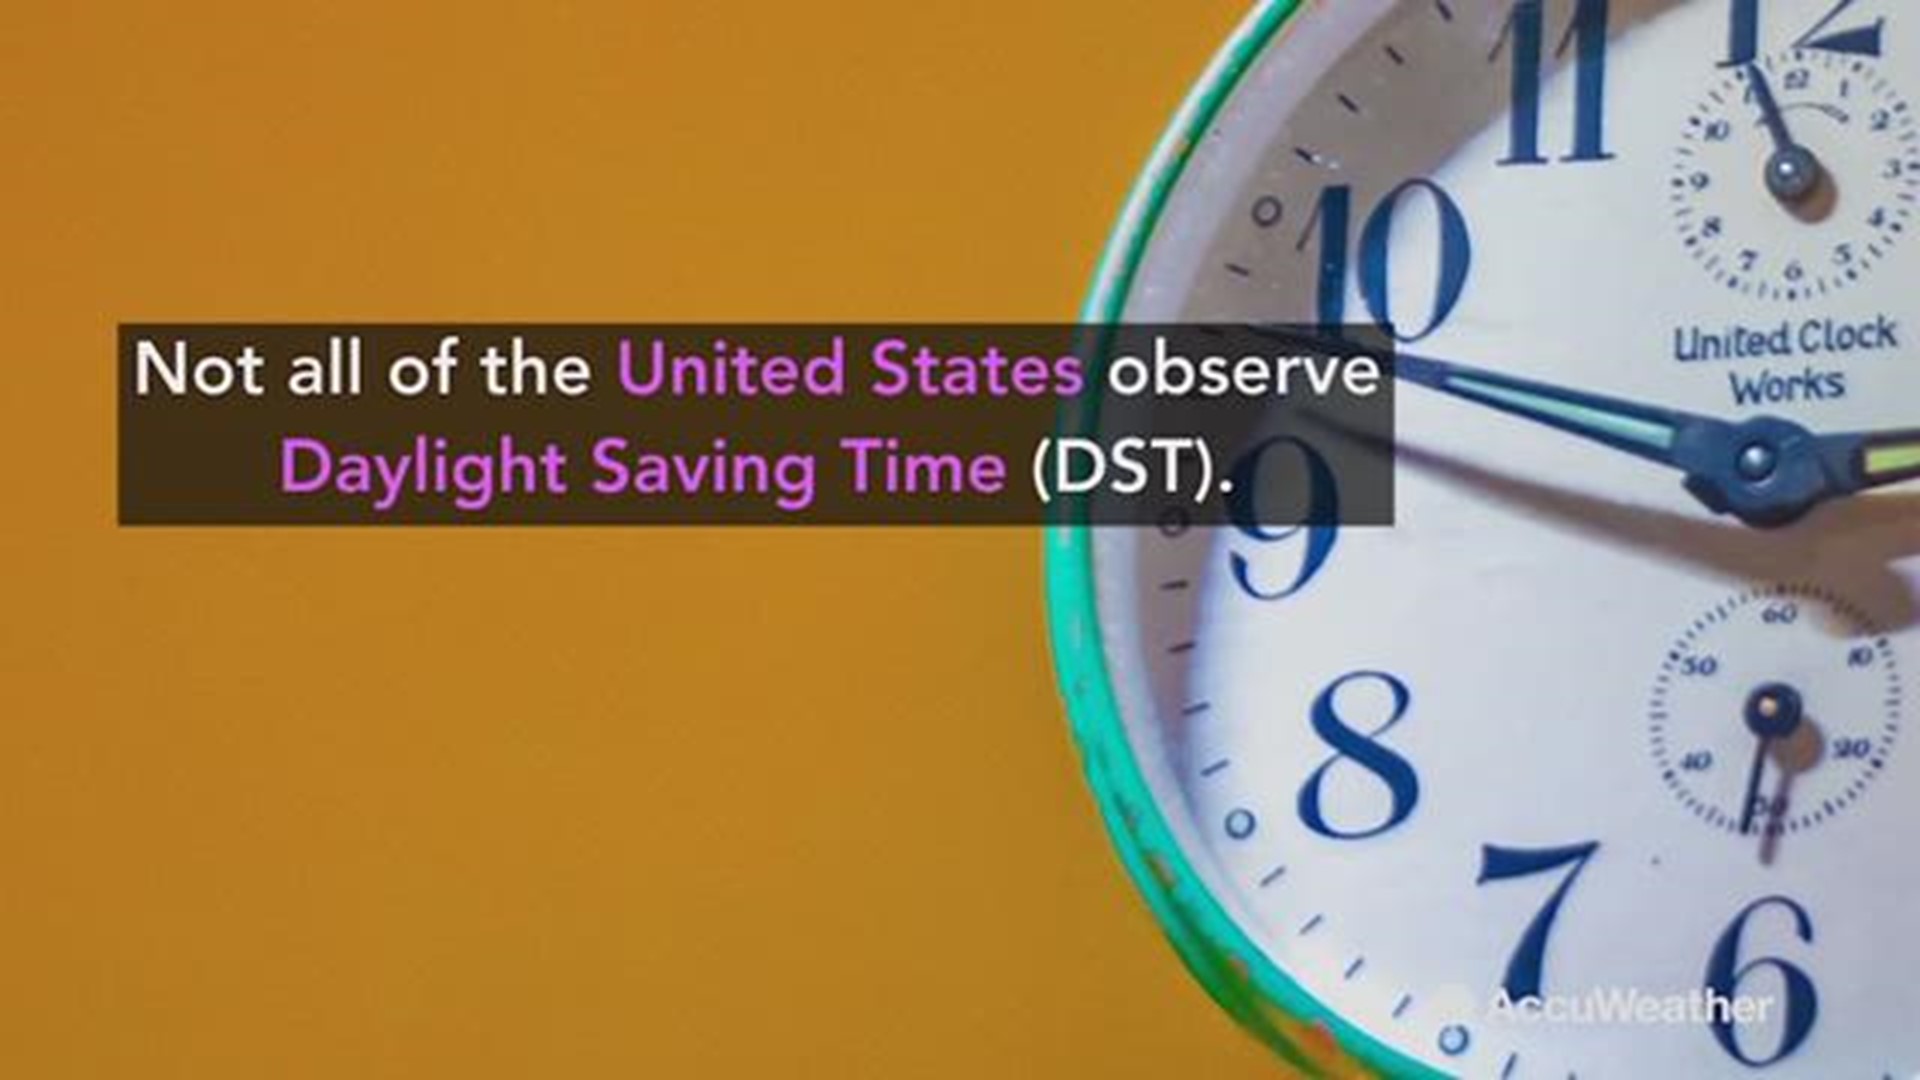 These US states don't observe Daylight Saving Time